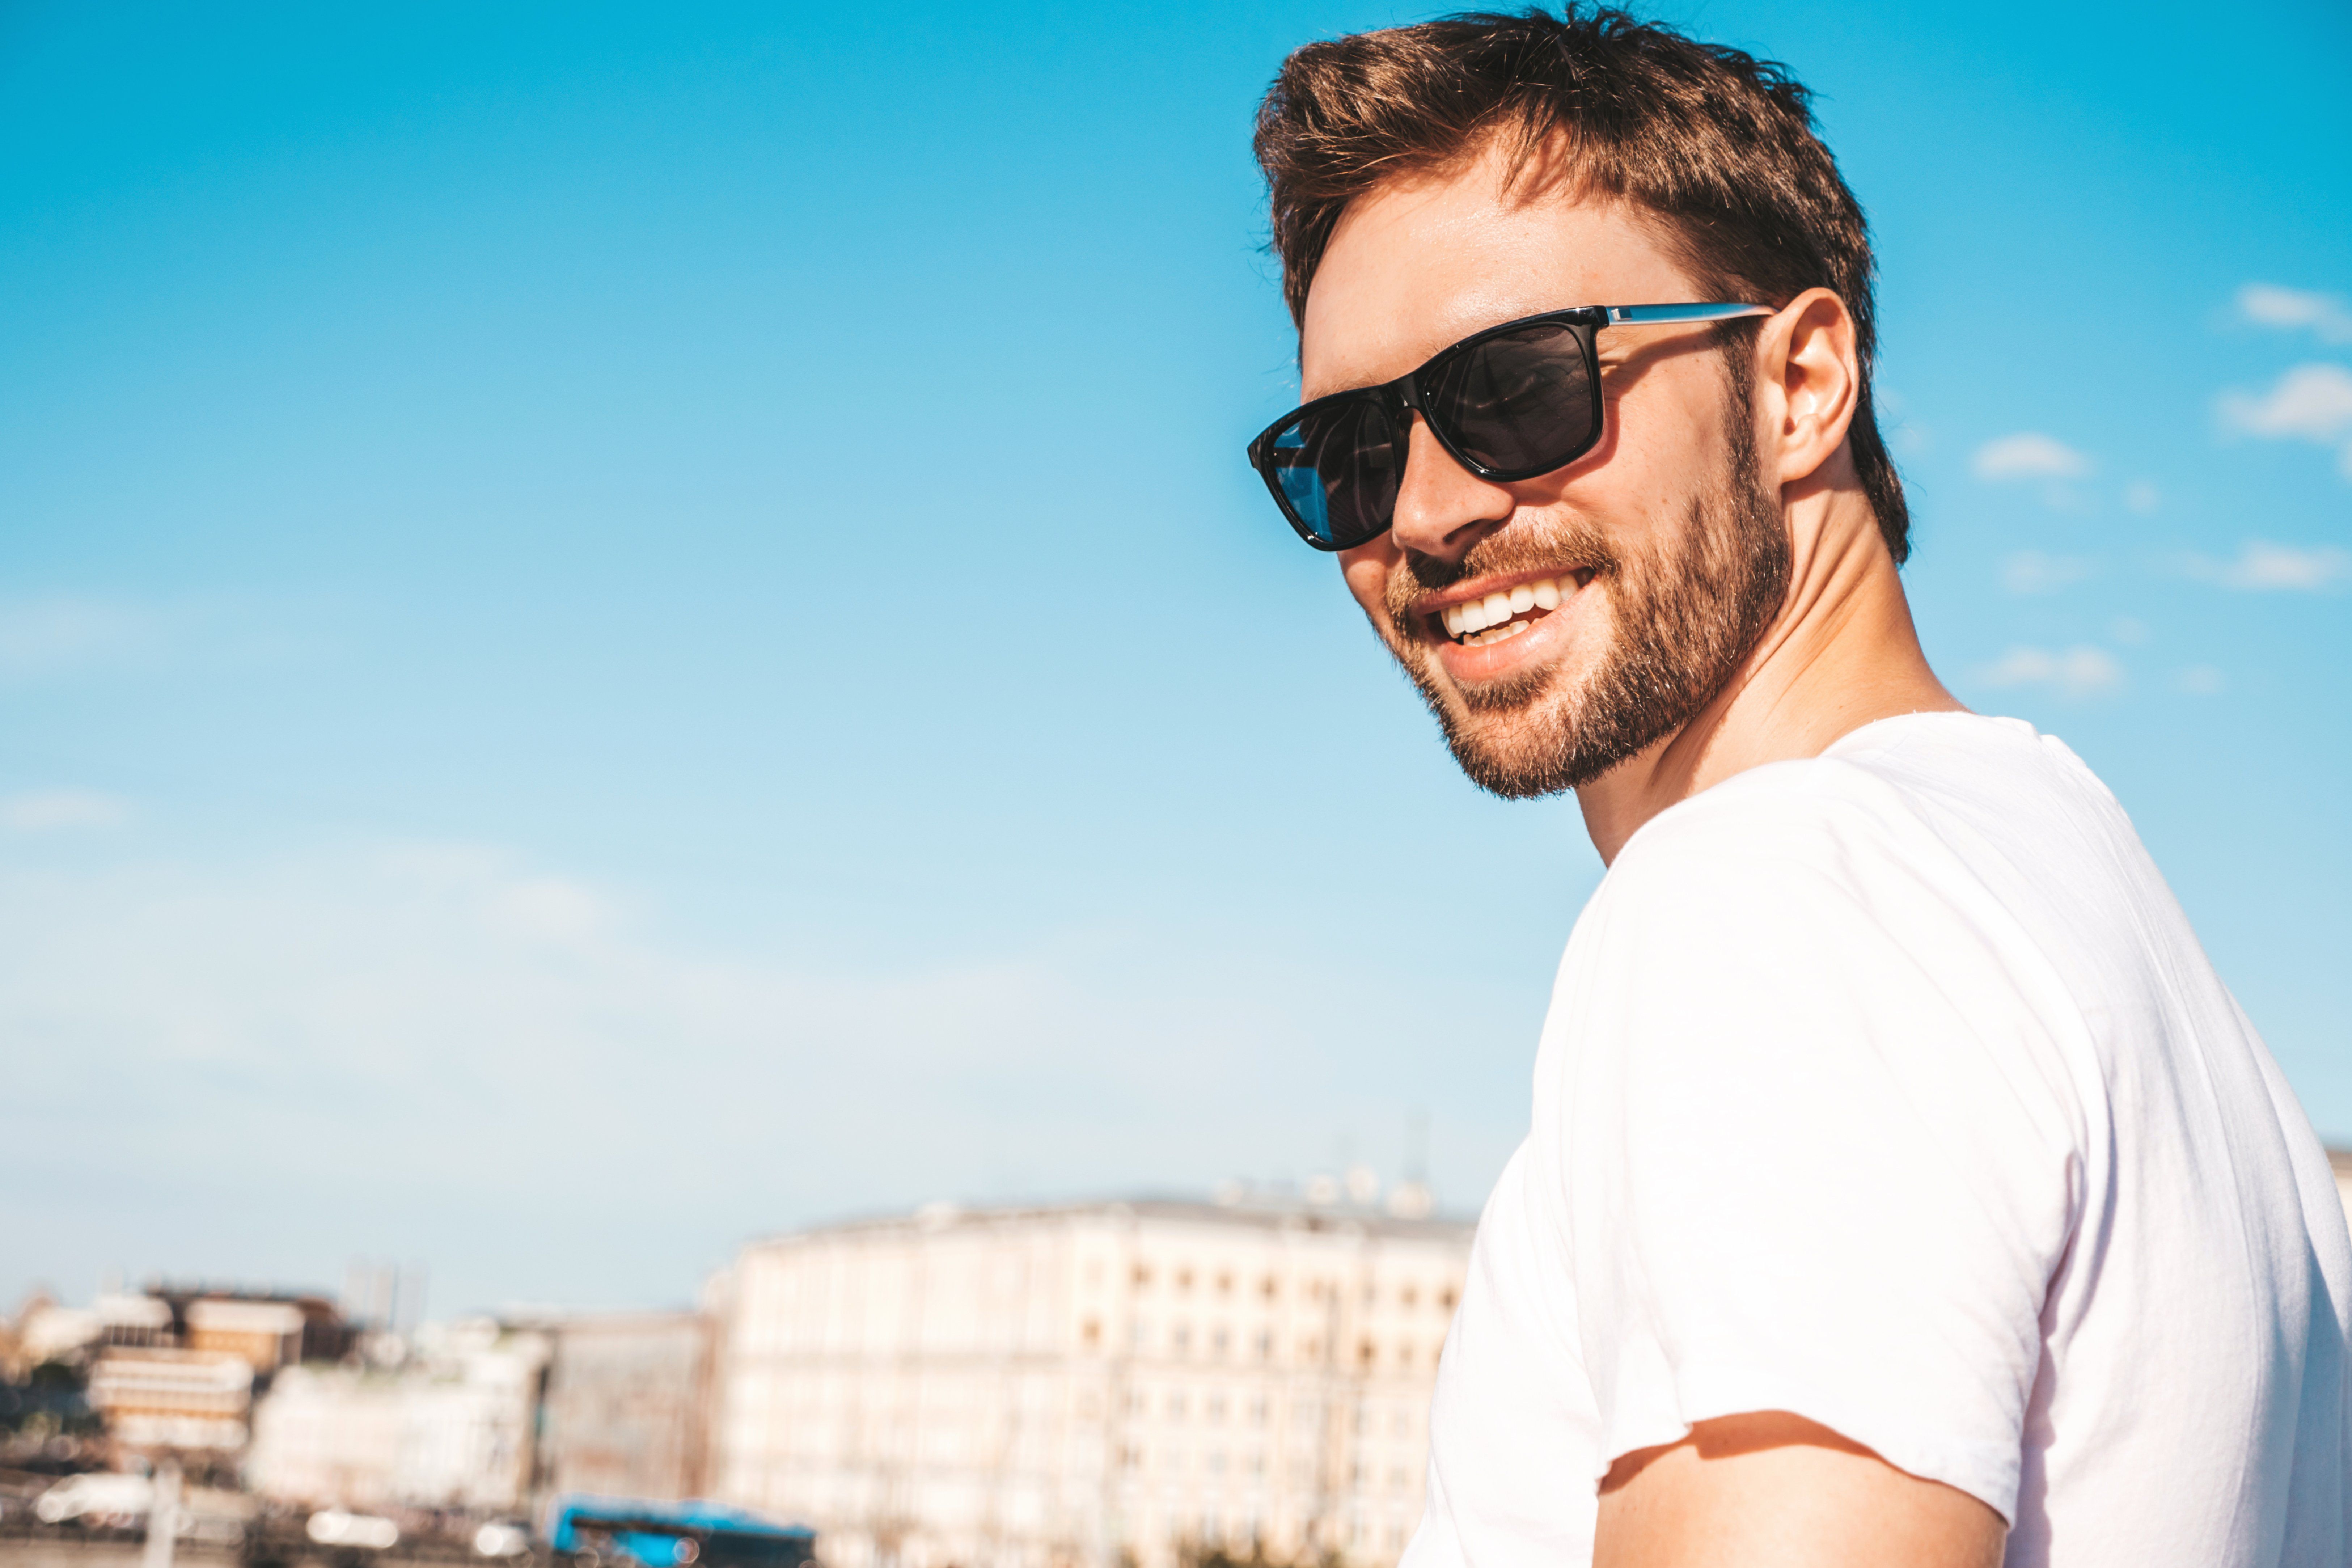 How to Pick the Best Sunglasses to Protect Your Eyes